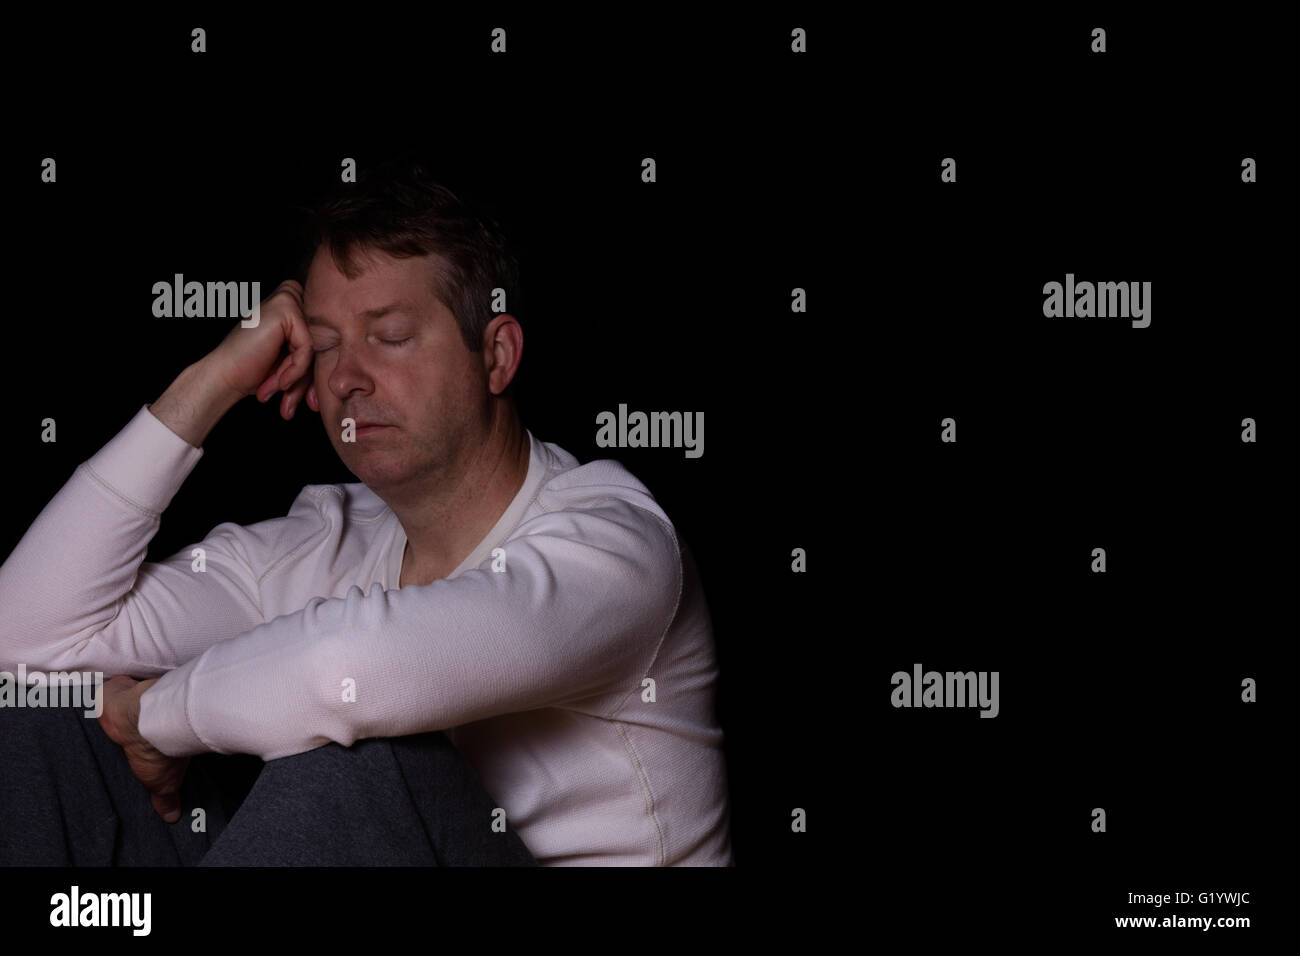 Side view of depressed mature man with eyes closed in thought.  Dark background with copy space available. Stock Photo